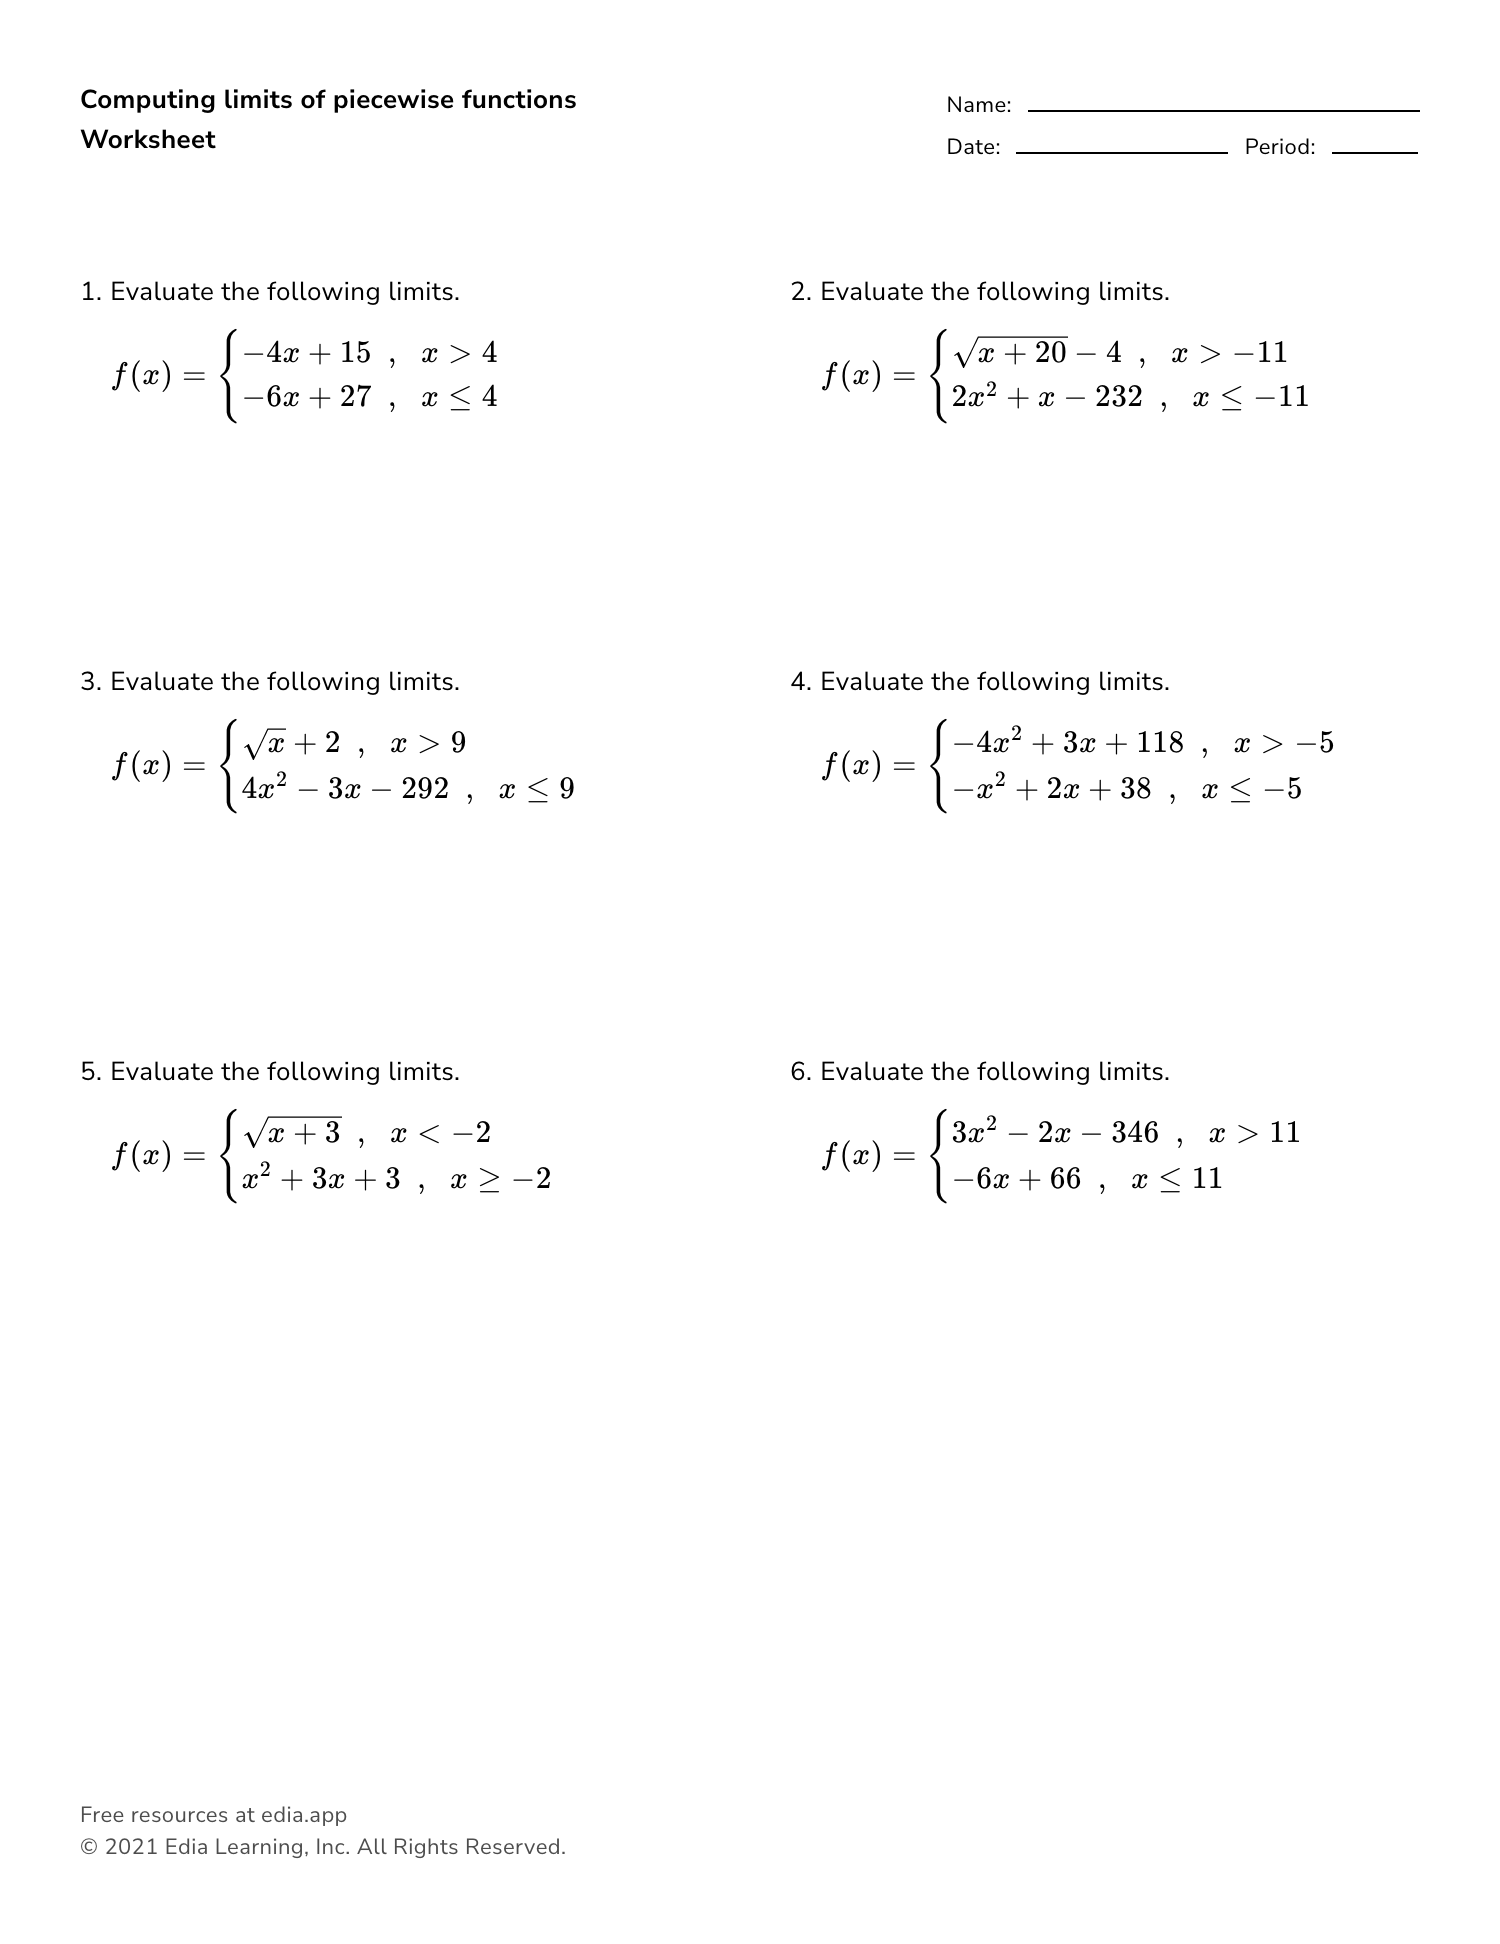 Computing Limits Of Piecewise Functions - Worksheet With Regard To Evaluating Piecewise Functions Worksheet